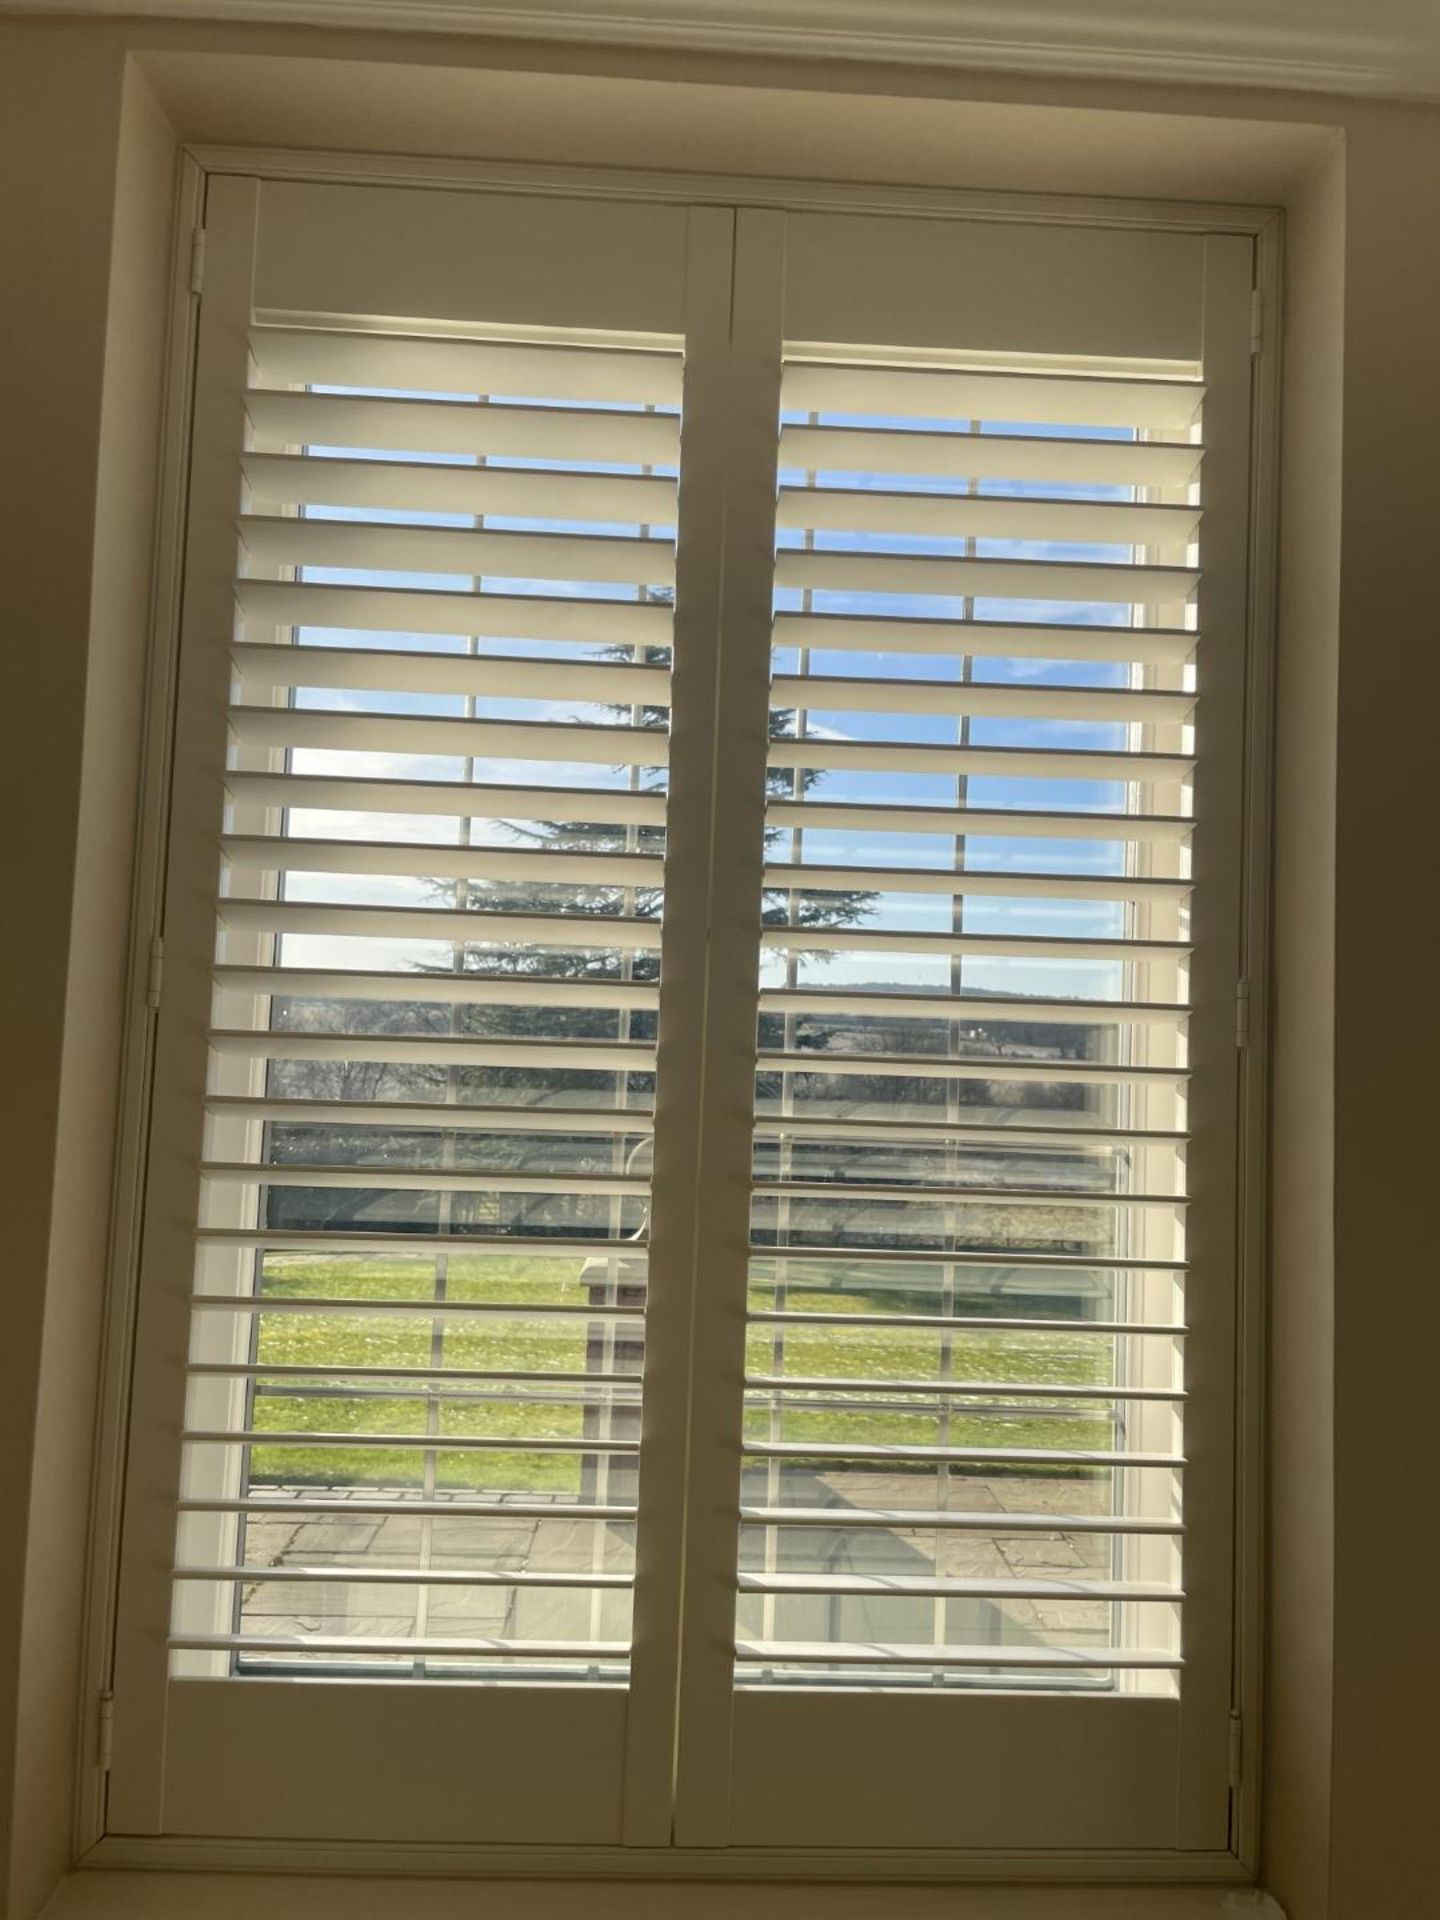 1 x Hardwood Timber Double Glazed Window Frames fitted with Shutter Blinds, In White - Ref: PAN107 - Image 15 of 15